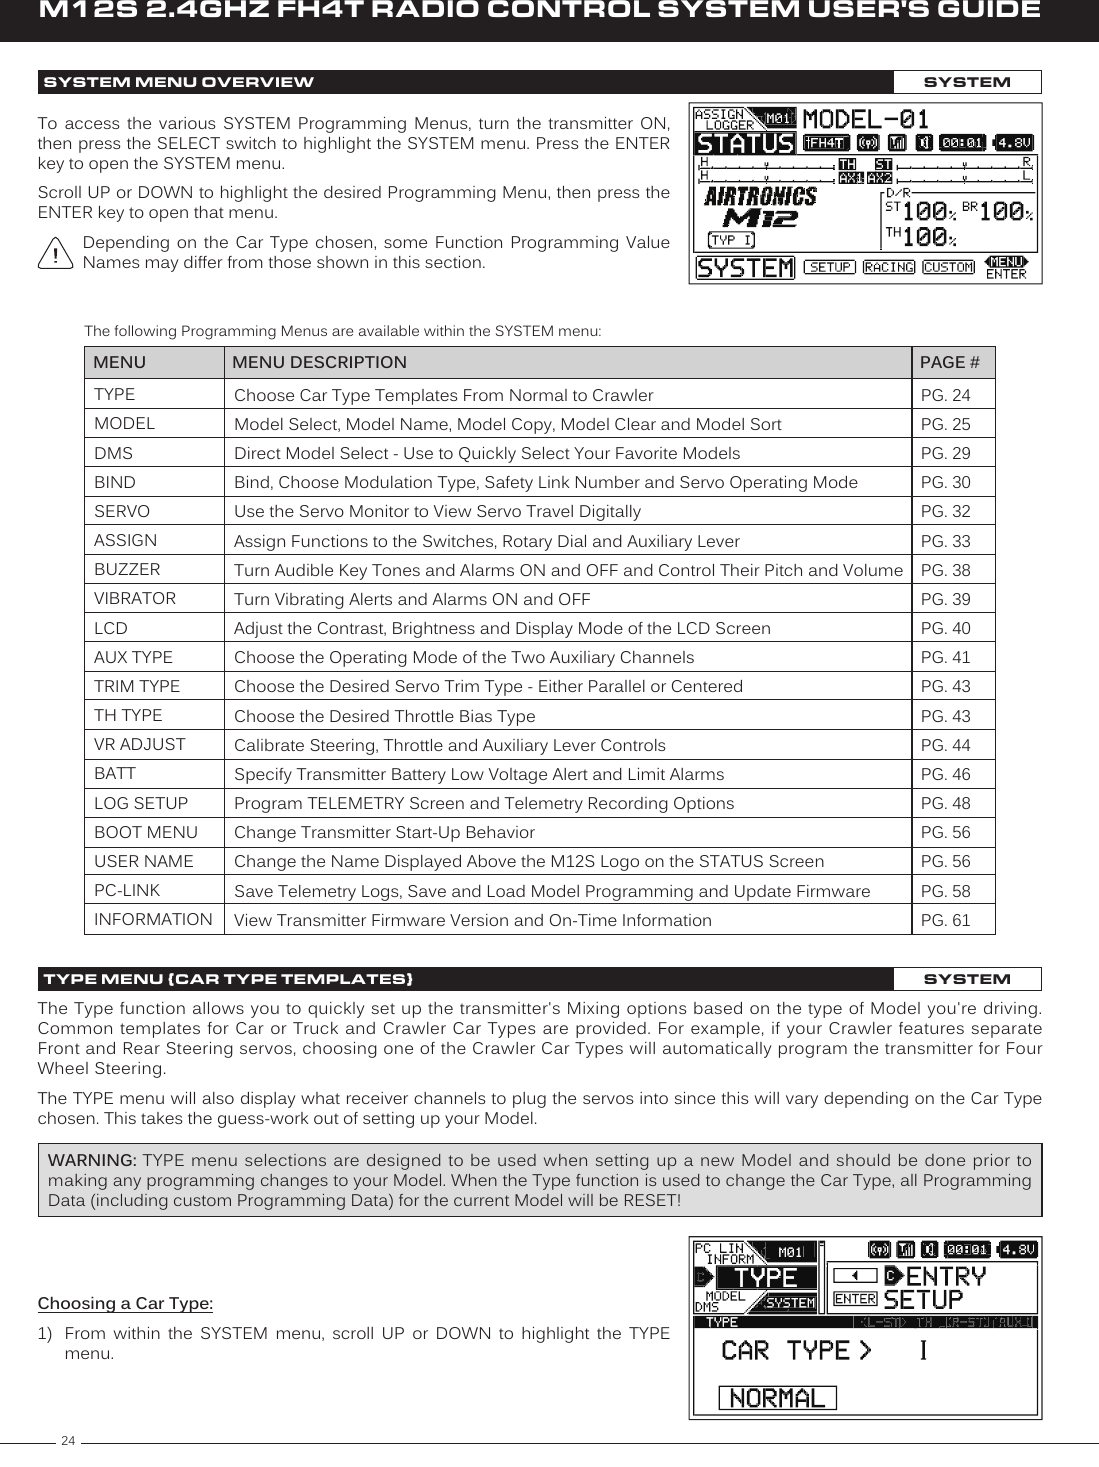 24M12S 2.4GHZ FH4T RADIO CONTROL SYSTEM USER&apos;S GUIDETYPEMODELDMSBINDSERVOASSIGNBUZZERVIBRATORLCDAUX TYPETRIM TYPETH TYPEVR ADJUSTBATTLOG SETUPBOOT MENUUSER NAMEPC-LINKINFORMATIONPG. 24PG. 25PG. 29PG. 30PG. 32PG. 33PG. 38PG. 39PG. 40PG. 41PG. 43PG. 43PG. 44PG. 46PG. 48PG. 56PG. 56PG. 58PG. 61MENU PAGE #MENU DESCRIPTIONChoose Car Type Templates From Normal to Crawler Model Select, Model Name, Model Copy, Model Clear and Model SortDirect Model Select - Use to Quickly Select Your Favorite ModelsBind, Choose Modulation Type, Safety Link Number and Servo Operating ModeUse the Servo Monitor to View Servo Travel DigitallyAssign Functions to the Switches, Rotary Dial and Auxiliary LeverTurn Audible Key Tones and Alarms ON and OFF and Control Their Pitch and VolumeTurn Vibrating Alerts and Alarms ON and OFFAdjust the Contrast, Brightness and Display Mode of the LCD ScreenChoose the Operating Mode of the Two Auxiliary ChannelsChoose the Desired Servo Trim Type - Either Parallel or CenteredChoose the Desired Throttle Bias TypeCalibrate Steering, Throttle and Auxiliary Lever ControlsSpecify Transmitter Battery Low Voltage Alert and Limit AlarmsProgram TELEMETRY Screen and Telemetry Recording OptionsChange Transmitter Start-Up BehaviorChange the Name Displayed Above the M12S Logo on the STATUS ScreenSave Telemetry Logs, Save and Load Model Programming and Update FirmwareView Transmitter Firmware Version and On-Time InformationThe following Programming Menus are available within the SYSTEM menu:The Type function allows you to quickly set up the transmitter&apos;s Mixing options based on the type of Model you&apos;re driving. Common templates  for Car  or Truck  and Crawler  Car Types  are provided. For example, if your Crawler features  separate Front and Rear Steering servos, choosing one of the Crawler Car Types will automatically program the transmitter for Four Wheel Steering.The TYPE menu will also display what receiver channels to plug the servos into since this will vary depending on the Car Type chosen. This takes the guess-work out of setting up your Model.WARNING: TYPE menu selections are designed to be used when setting up a  new Model and should be  done prior to making any programming changes to your Model. When the Type function is used to change the Car Type, all Programming Data (including custom Programming Data) for the current Model will be RESET!To  access  the  various  SYSTEM  Programming  Menus,  turn  the  transmitter  ON, then press the SELECT switch to highlight the SYSTEM menu. Press the ENTER key to open the SYSTEM menu.Scroll UP or DOWN to highlight the desired Programming Menu, then press the ENTER key to open that menu.Depending  on  the  Car  Type  chosen,  some  Function  Programming Value Names may differ from those shown in this section.Choosing a Car Type:1)  From  within  the  SYSTEM  menu,  scroll  UP  or  DOWN  to  highlight  the  TYPE menu.SYSTEM MENU OVERVIEW SYSTEMTYPE MENU {CAR TYPE TEMPLATES}SYSTEM